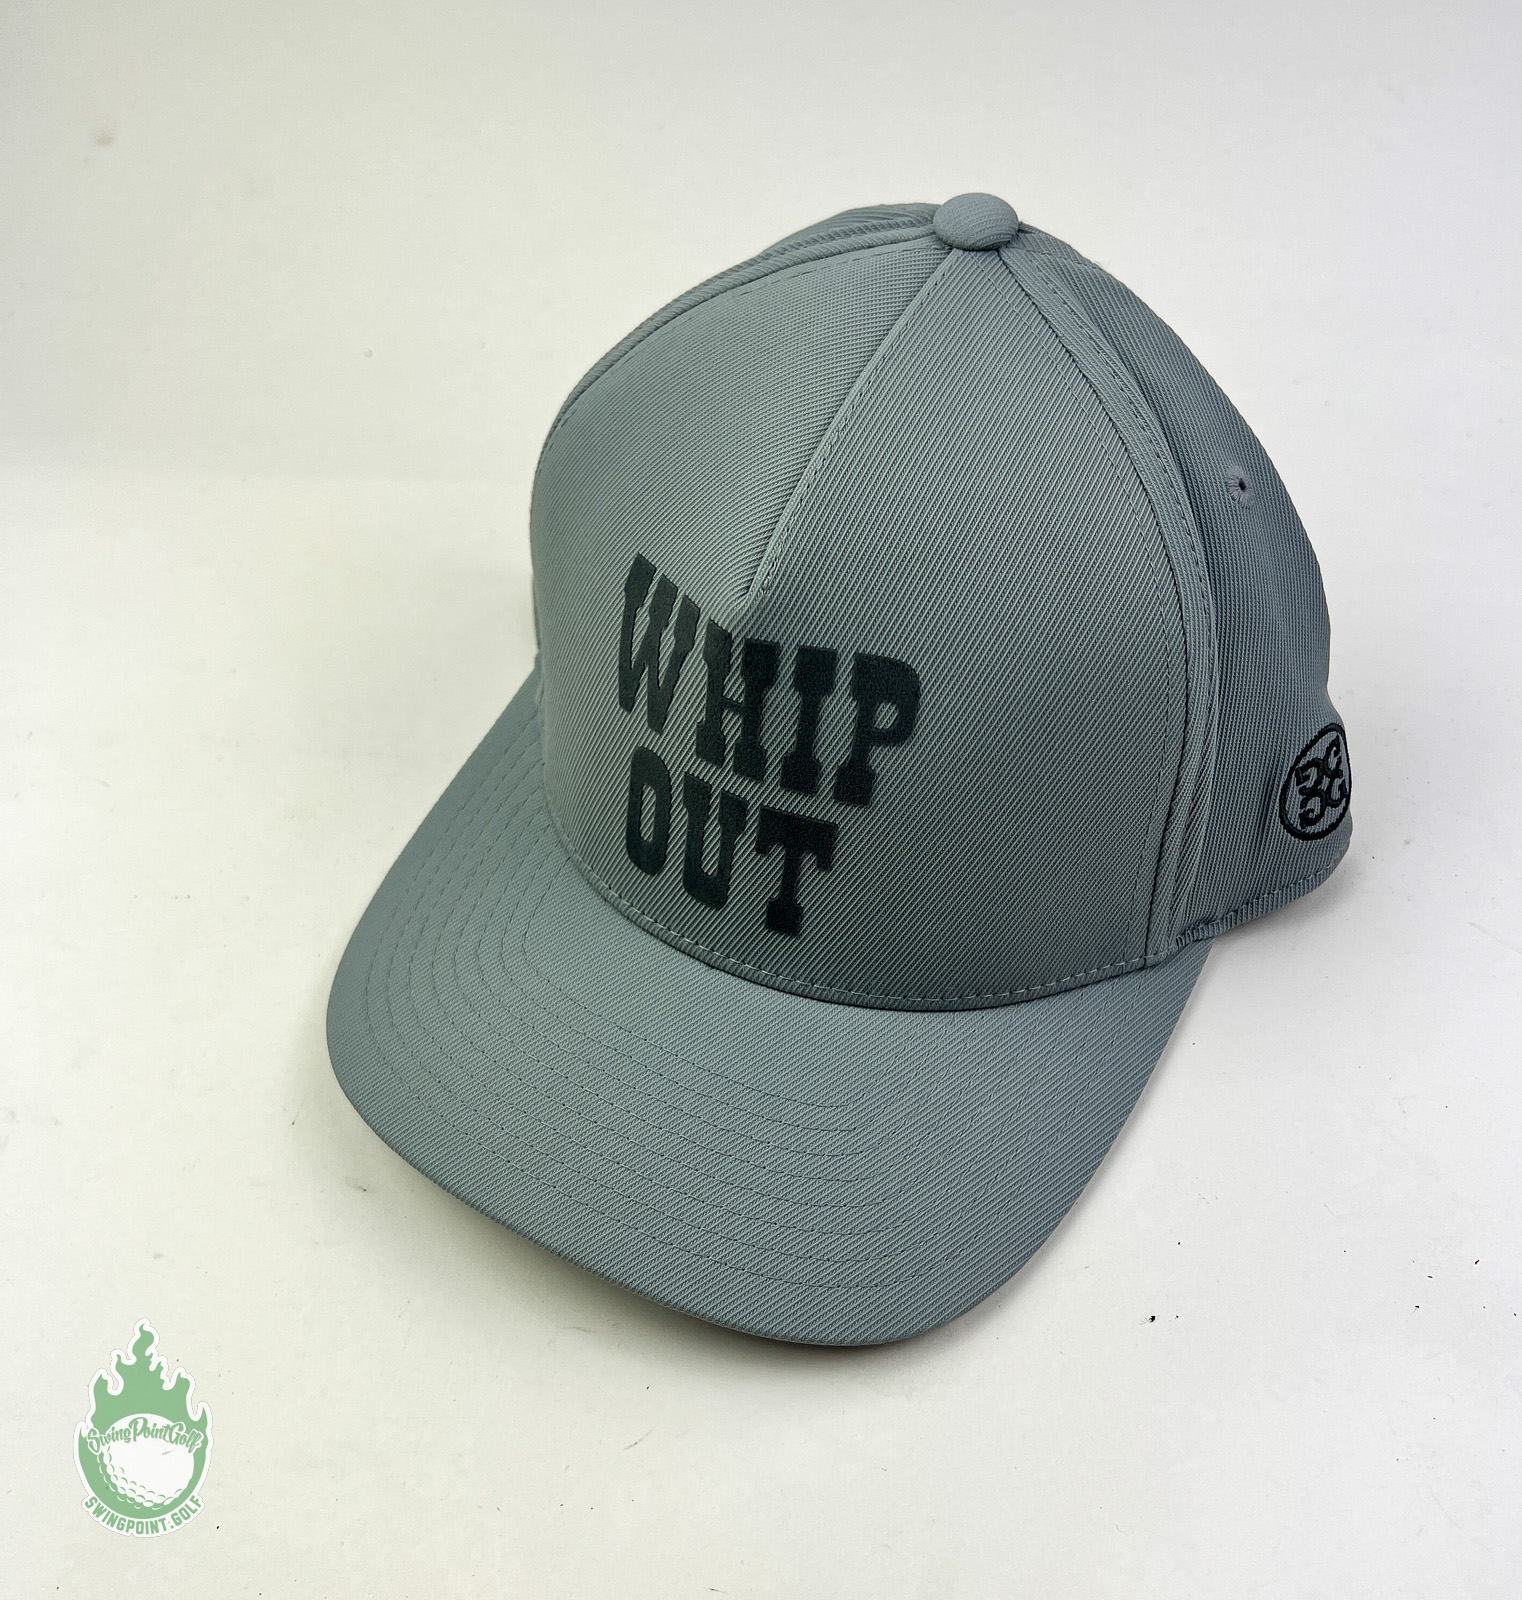 New with Tags G/Fore Trucker SwingPoint Golf Hat · Cap Whip Out Golf® Grey Snapback